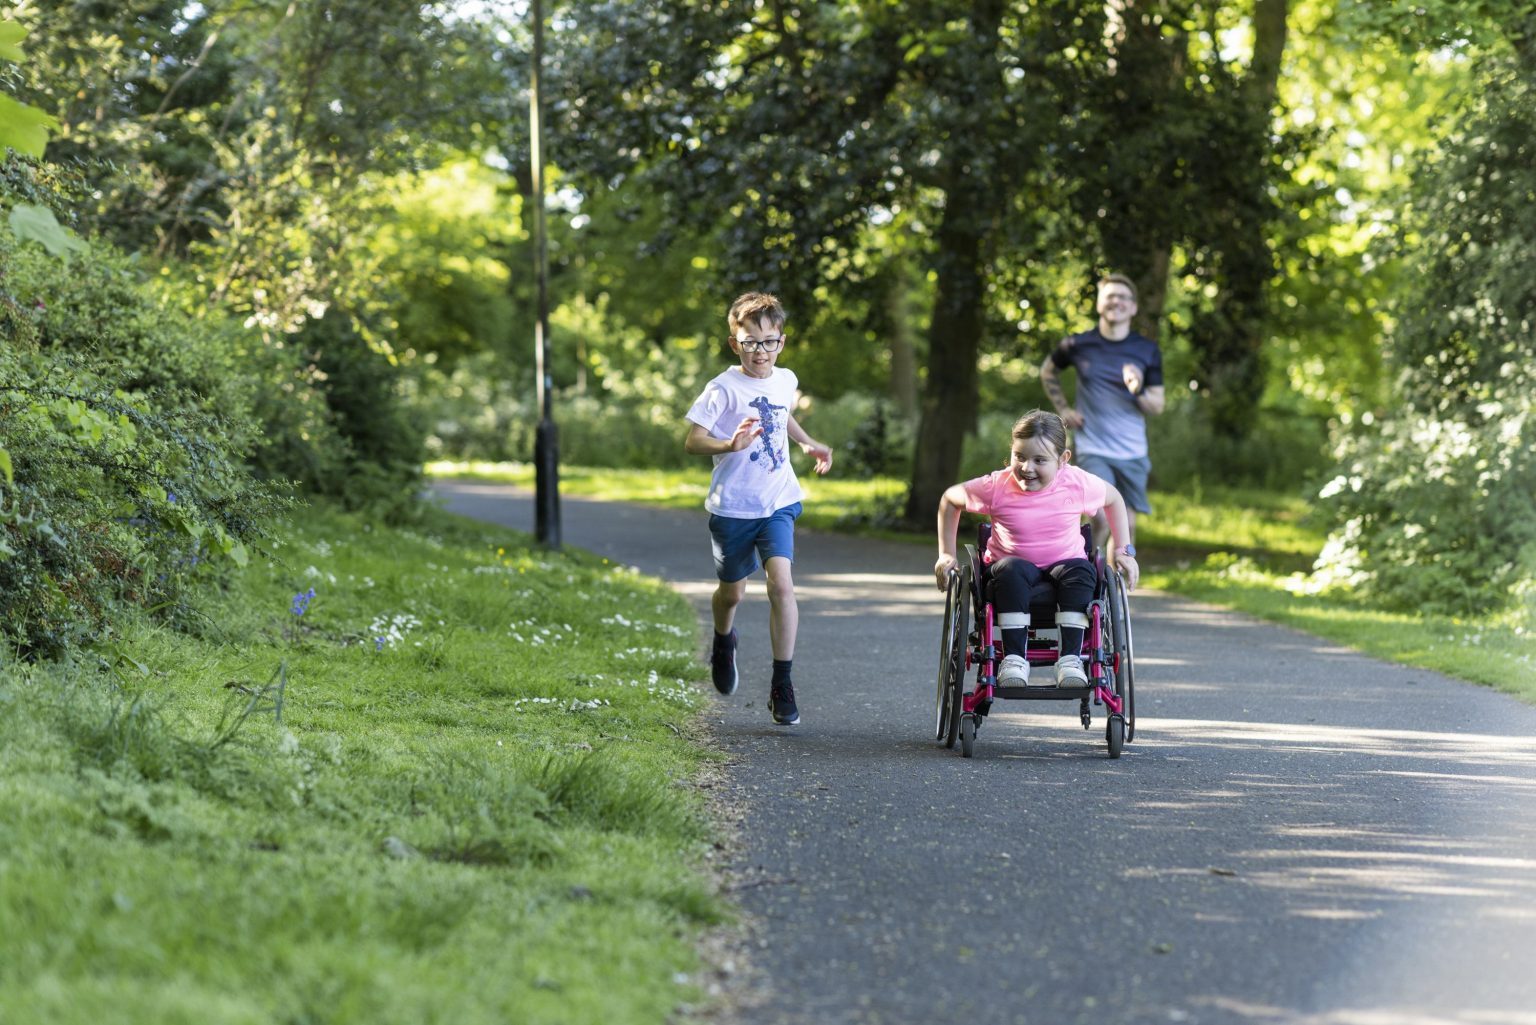 A person in wheelchair on a path next to a young person running, with another person running behind them.